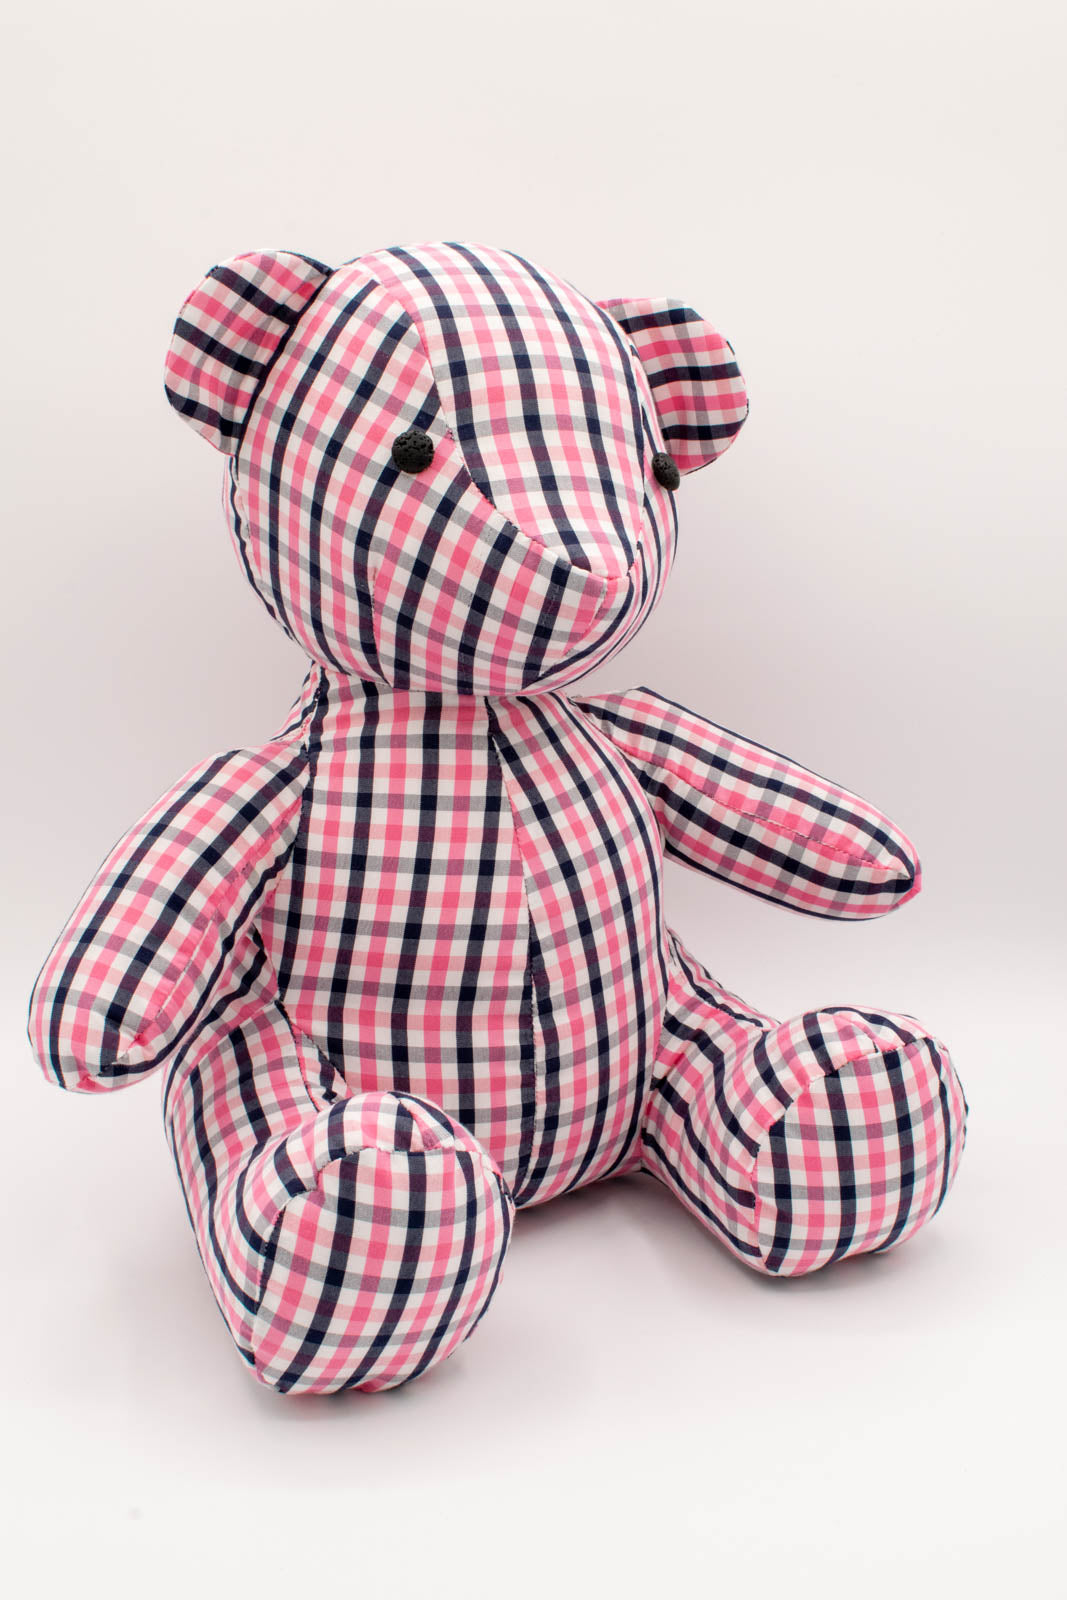 Blue and Pink Gingham Shirt Teddy Bear 7